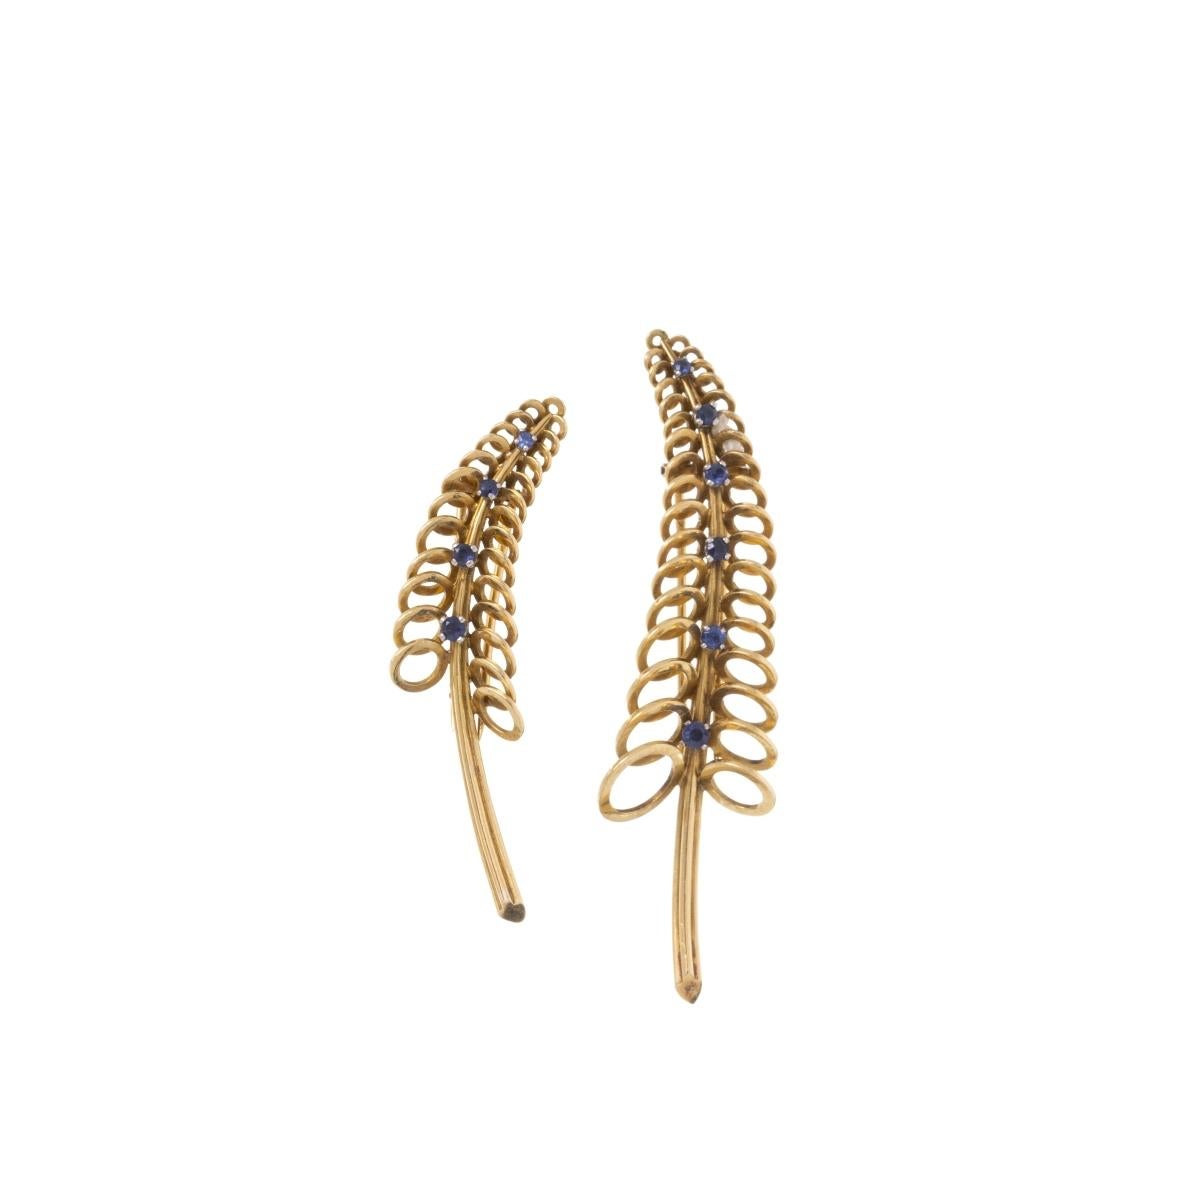 Two Pins in Gold Marchak, Paris, from the End of the 19th Century Art Deco In Good Condition For Sale In Madrid, ES